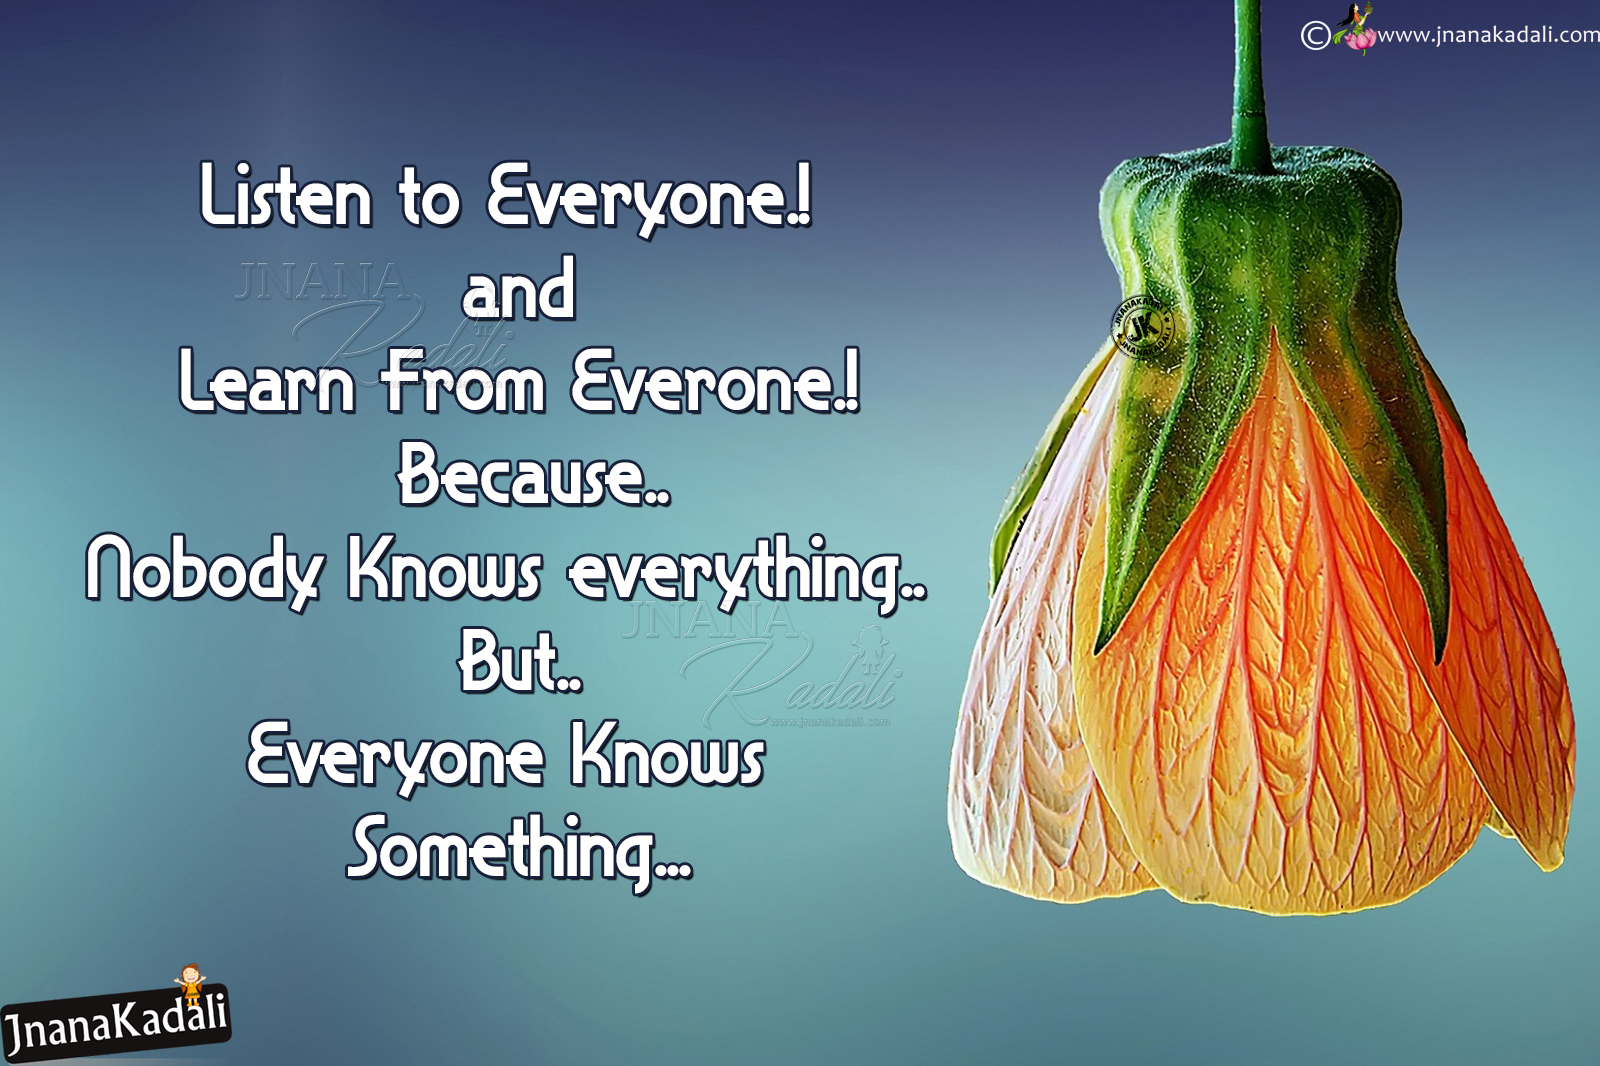 Best English Inspirational Quotes about Learning-Listen To Everyone for